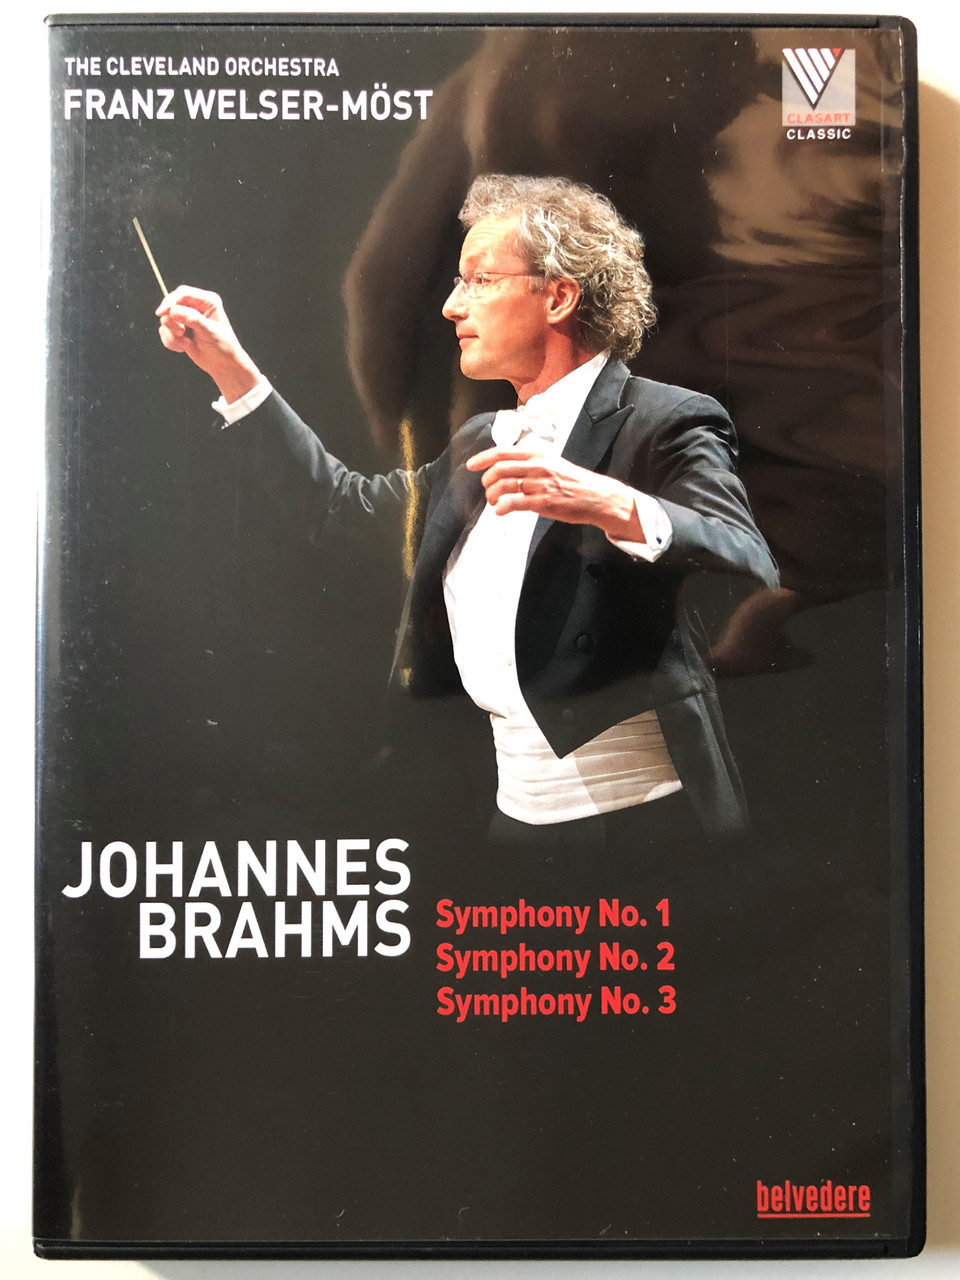 Brahms_-_Symphonies_1_2_3_FRANZ_WELSER-MST_THE_CLEVELAND_ORCHESTRA_Live_from_the_Royal_Albert_Hall_London_Performed_at_Musikverein_in_Vienna_DVD_2__88596.1691644864.1280.1280.JPG (960×1280)